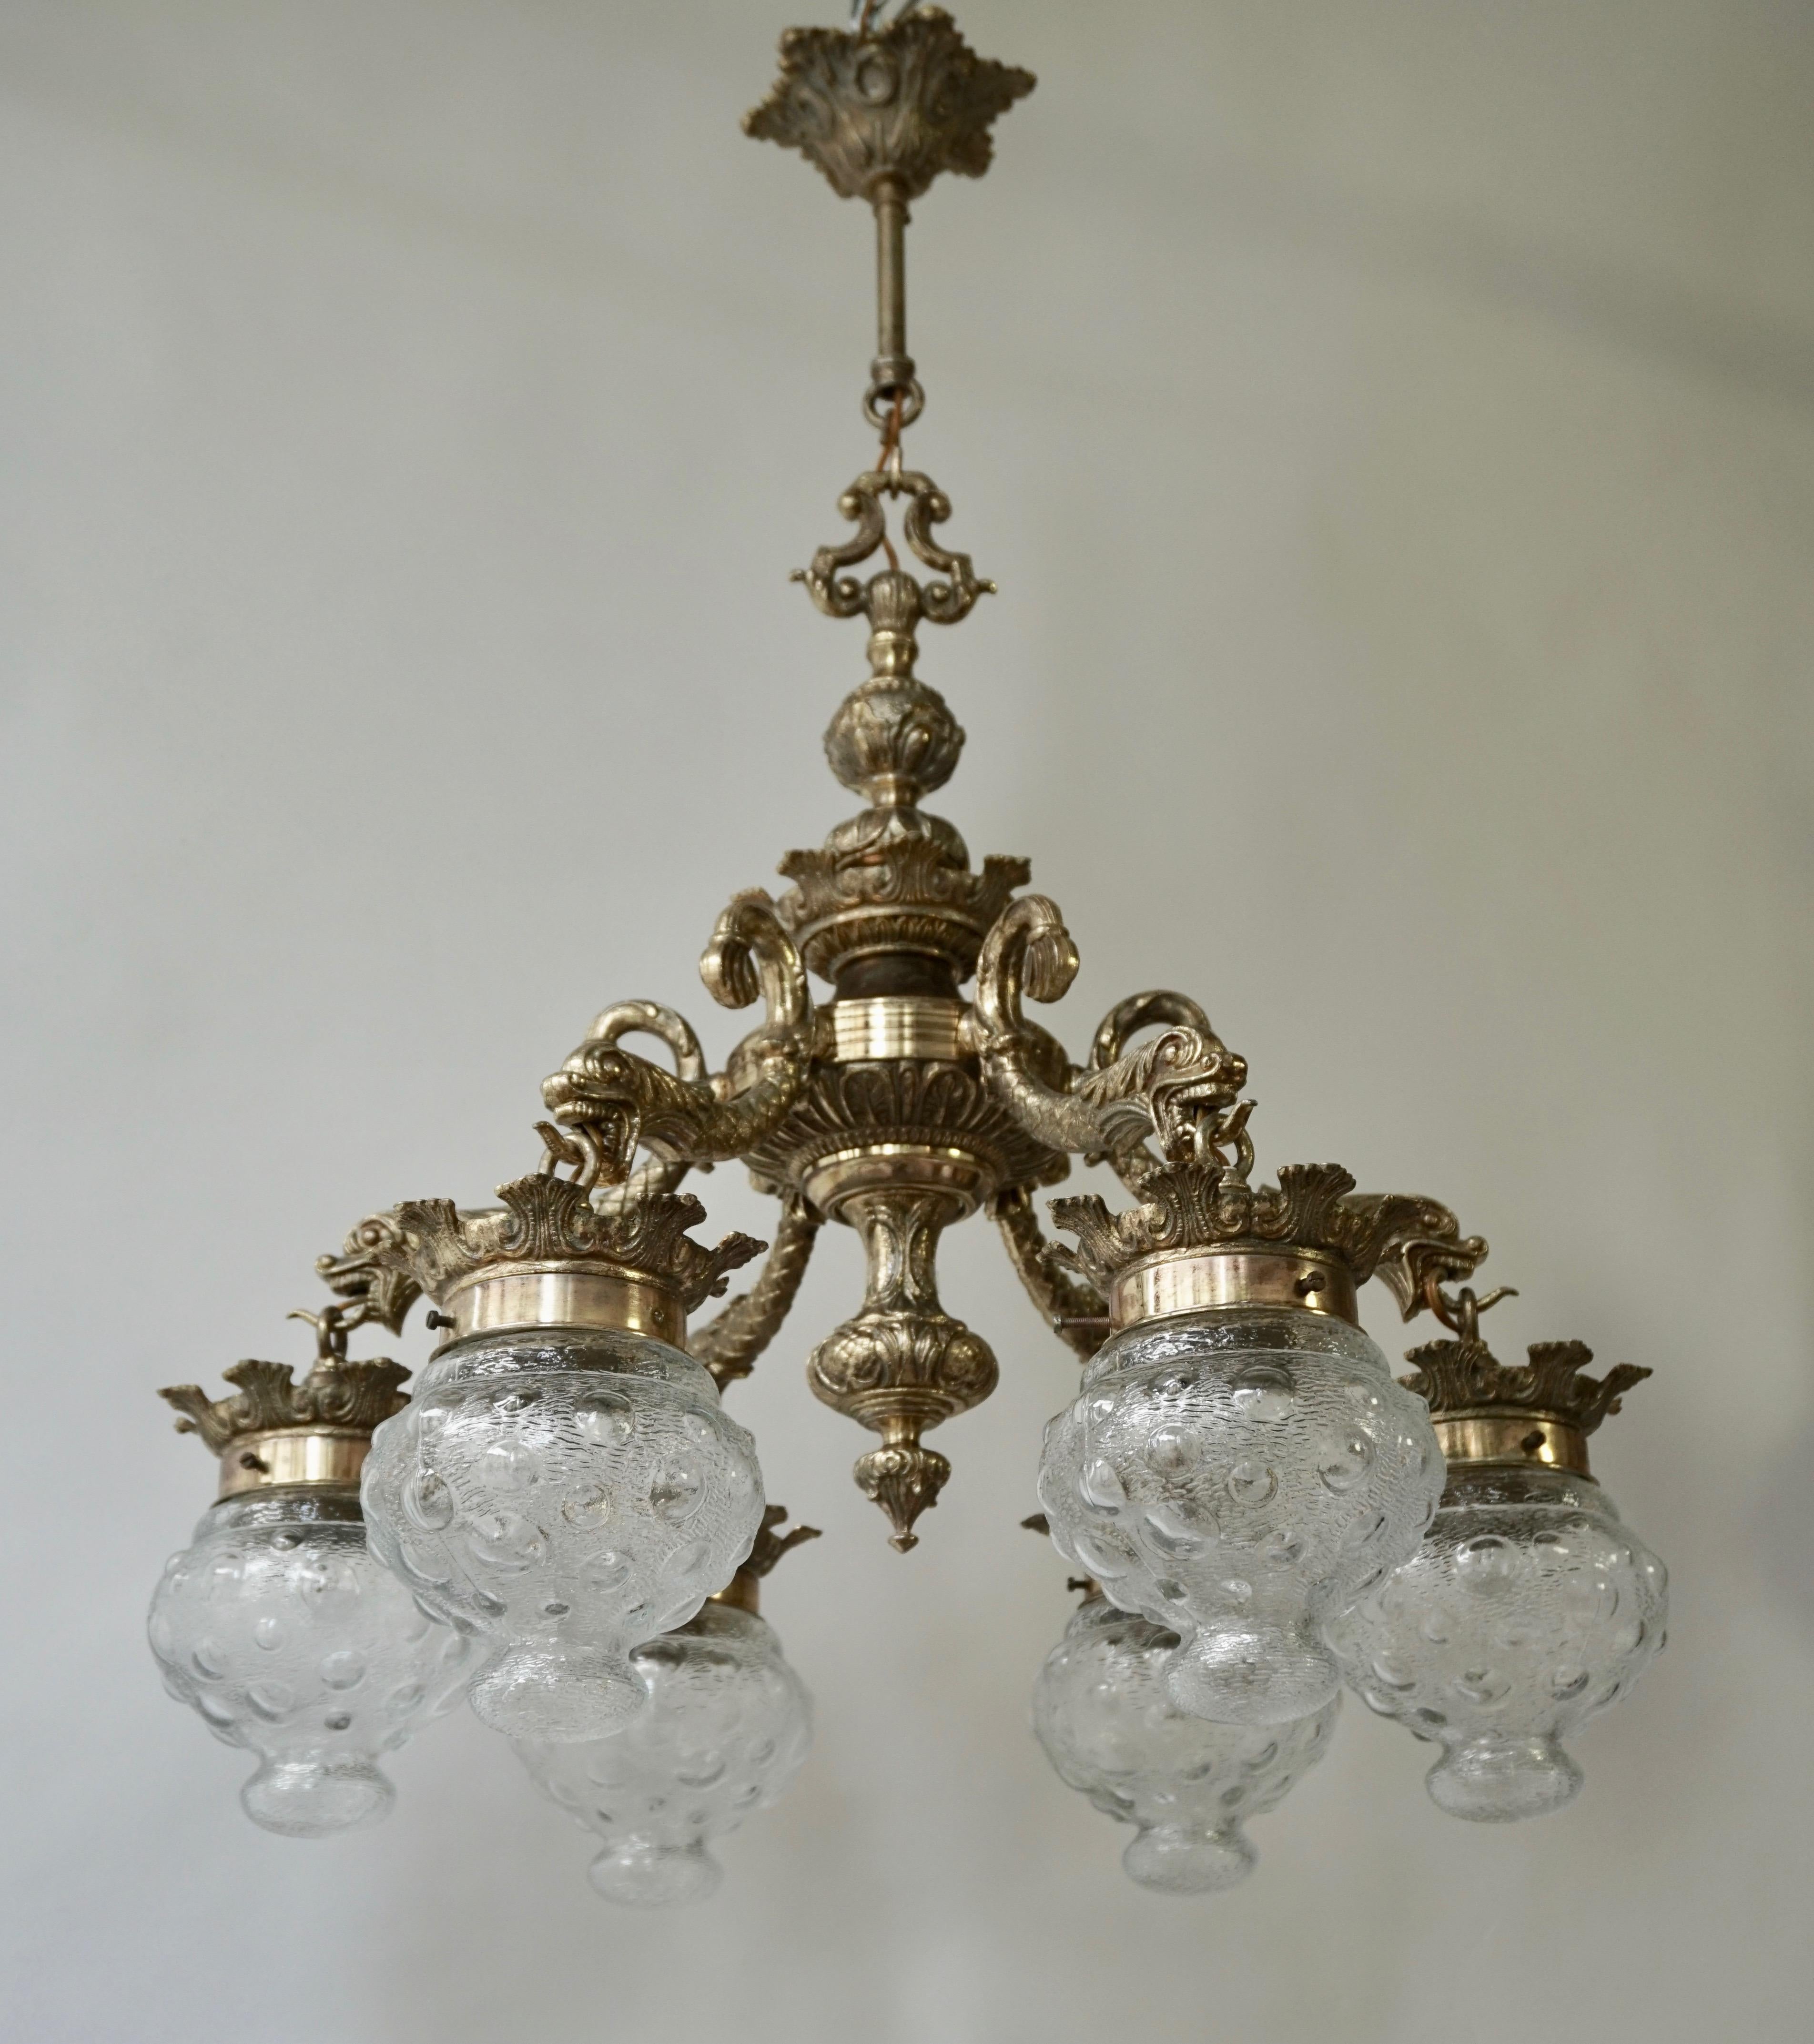 Stunning Brass Chandelier in Gothic or Medieval Style with Dragon Sculptures For Sale 1